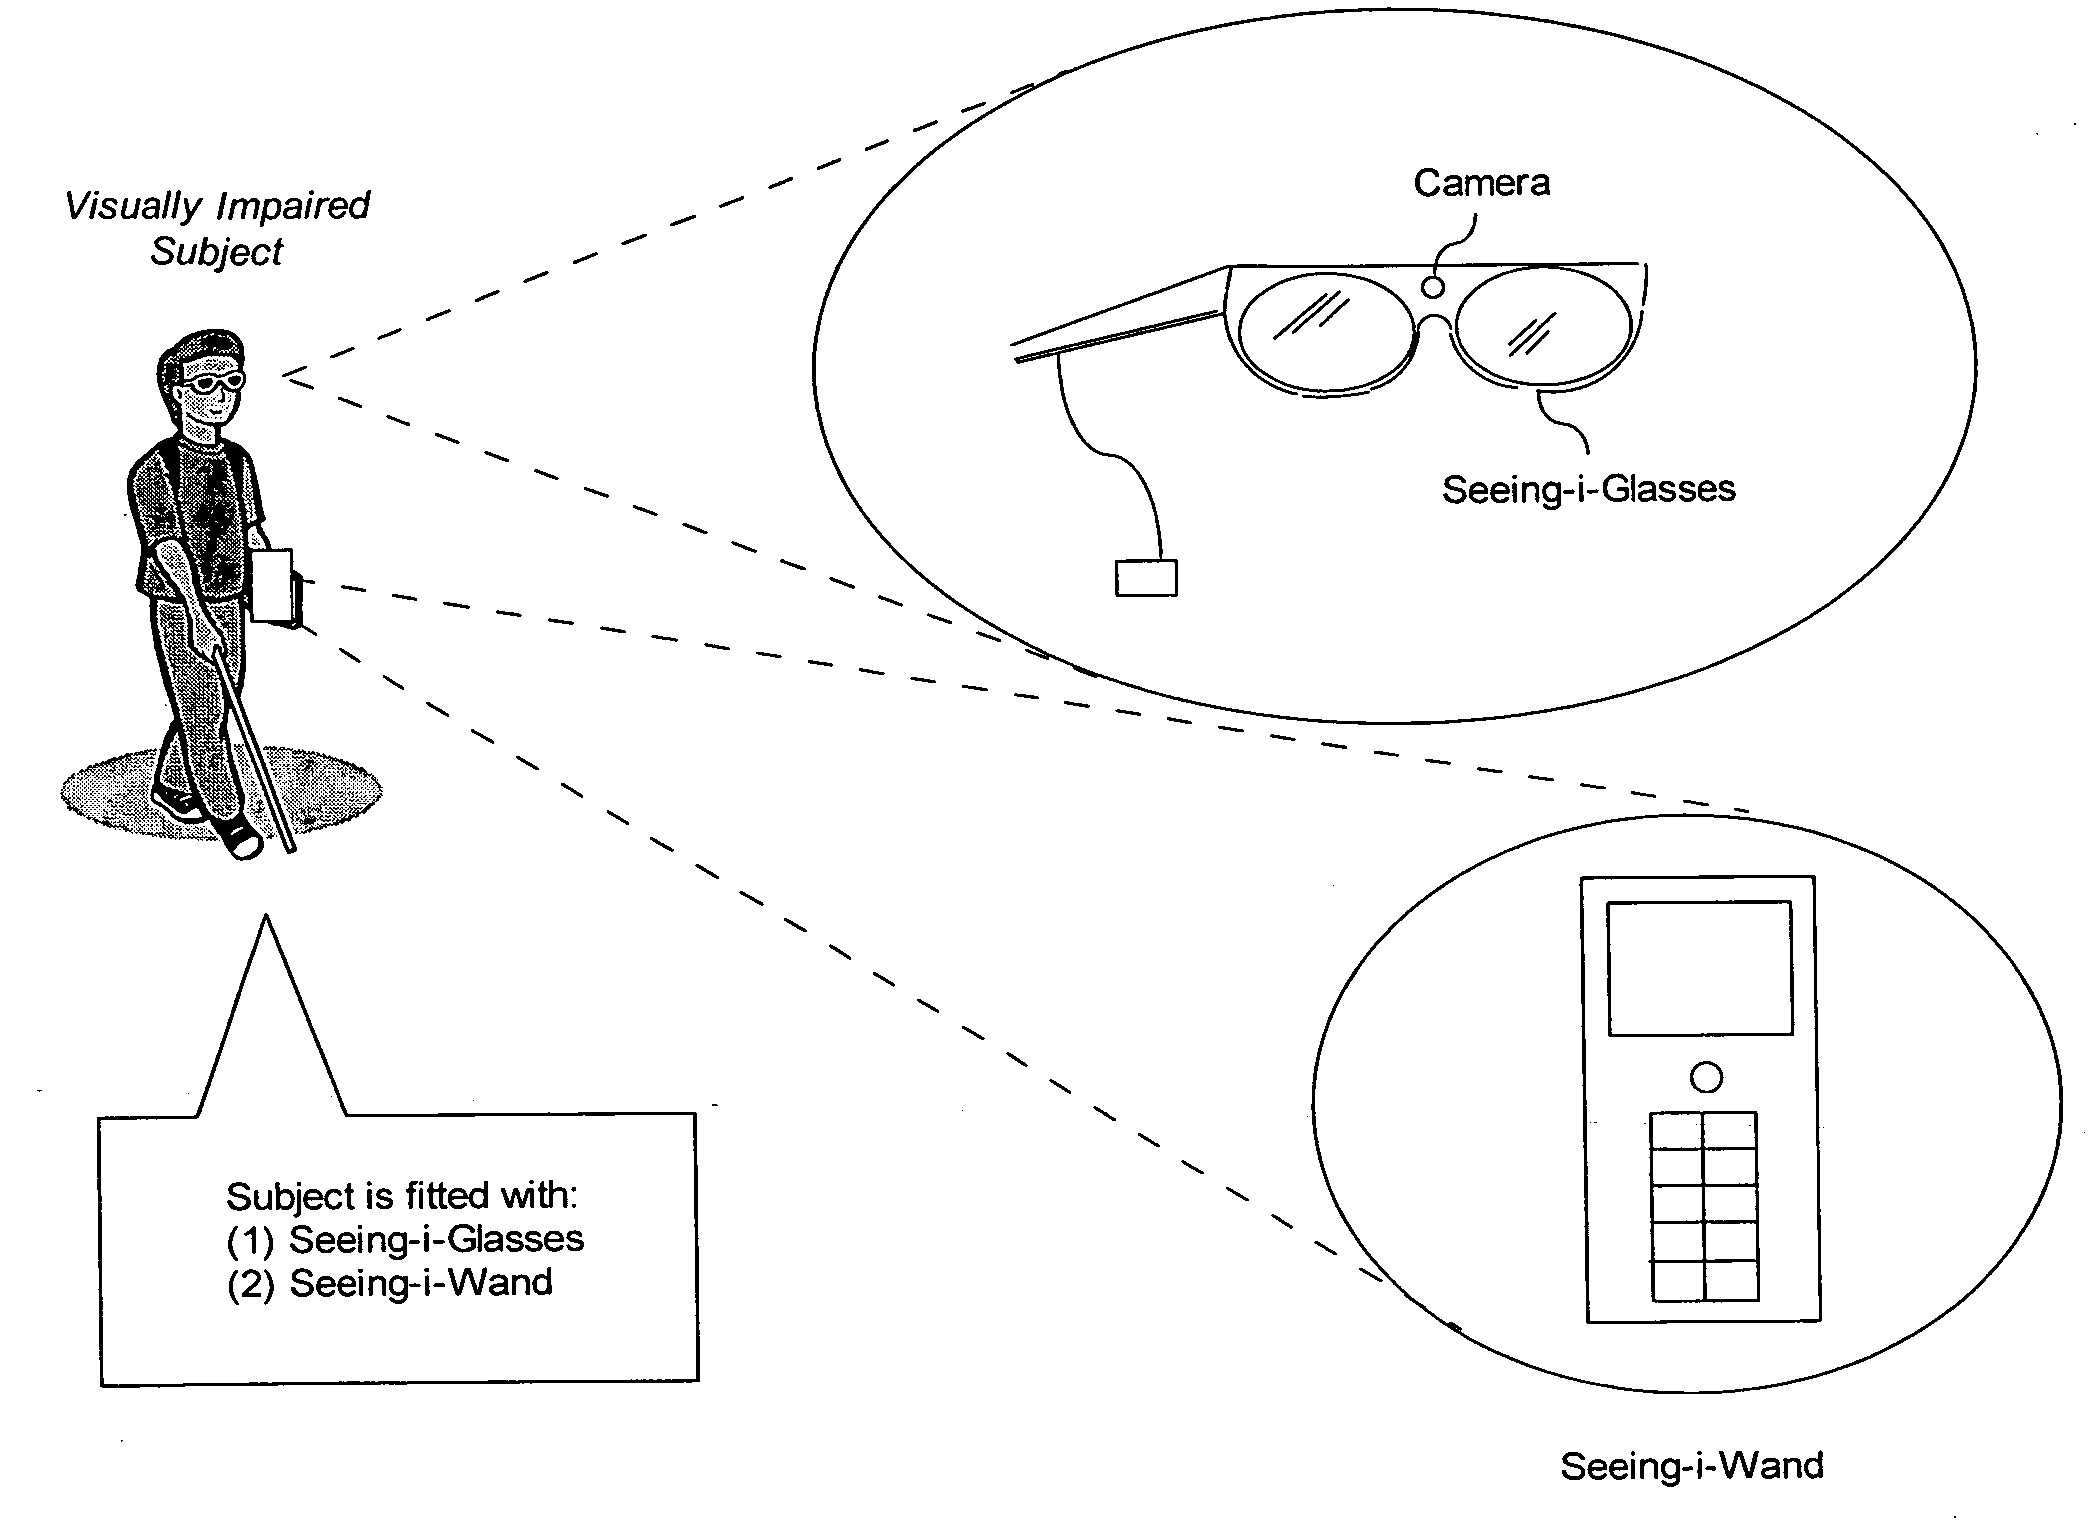 System and method for tele-presence